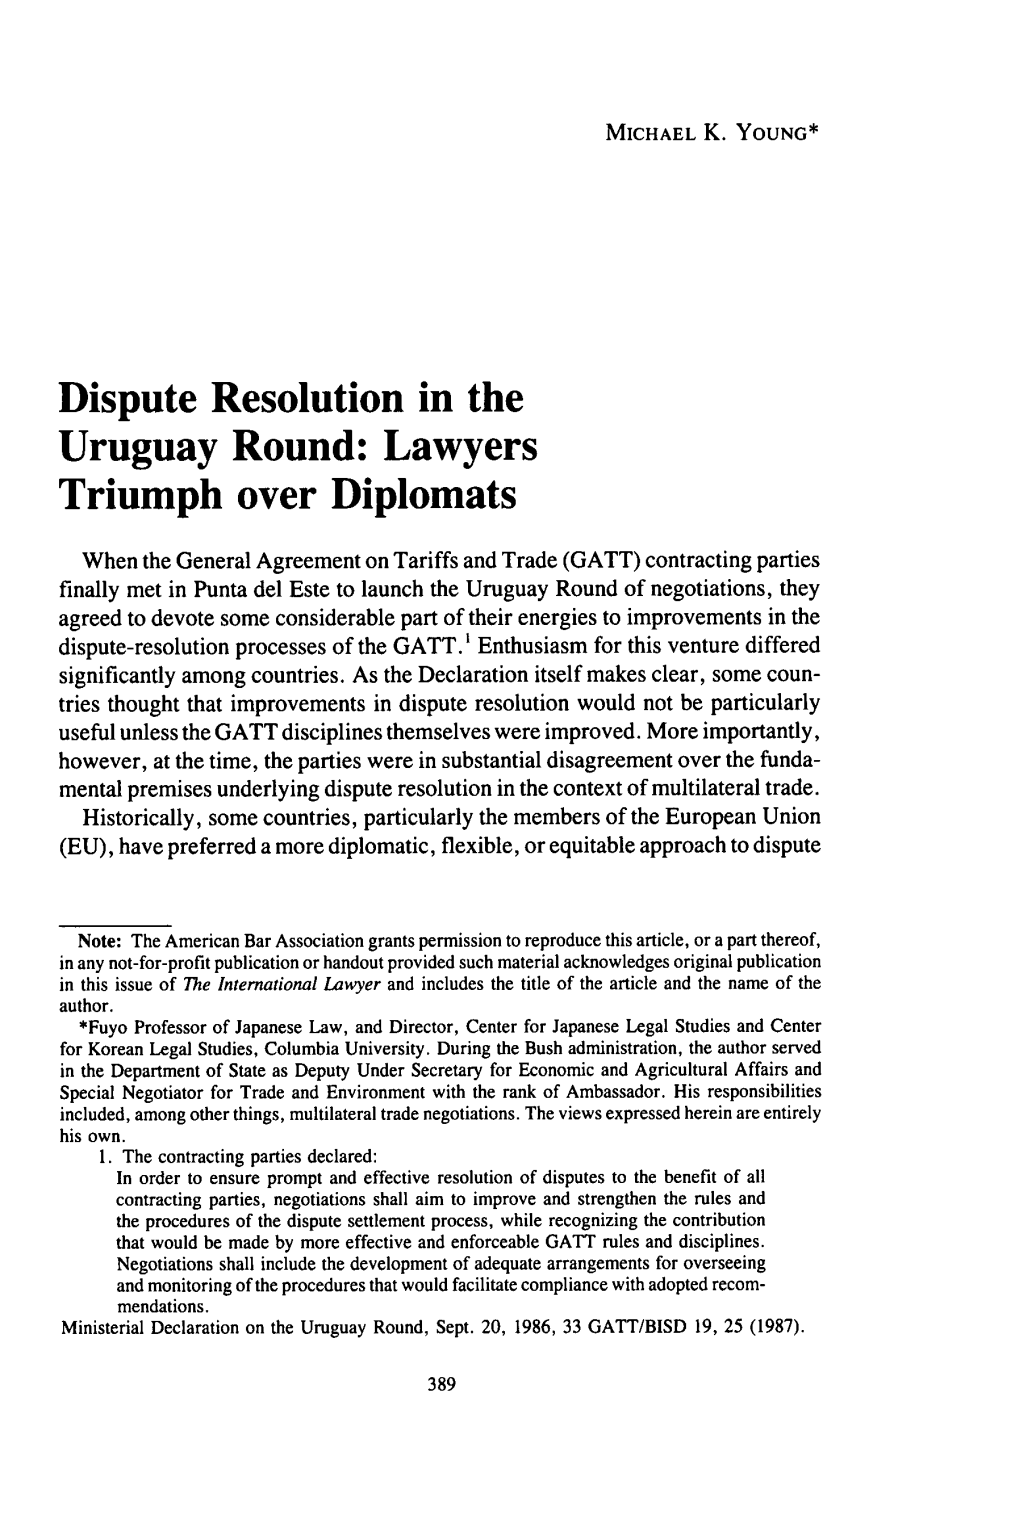 Dispute Resolution in the Uruguay Round: Lawyers Triumph Over Diplomats